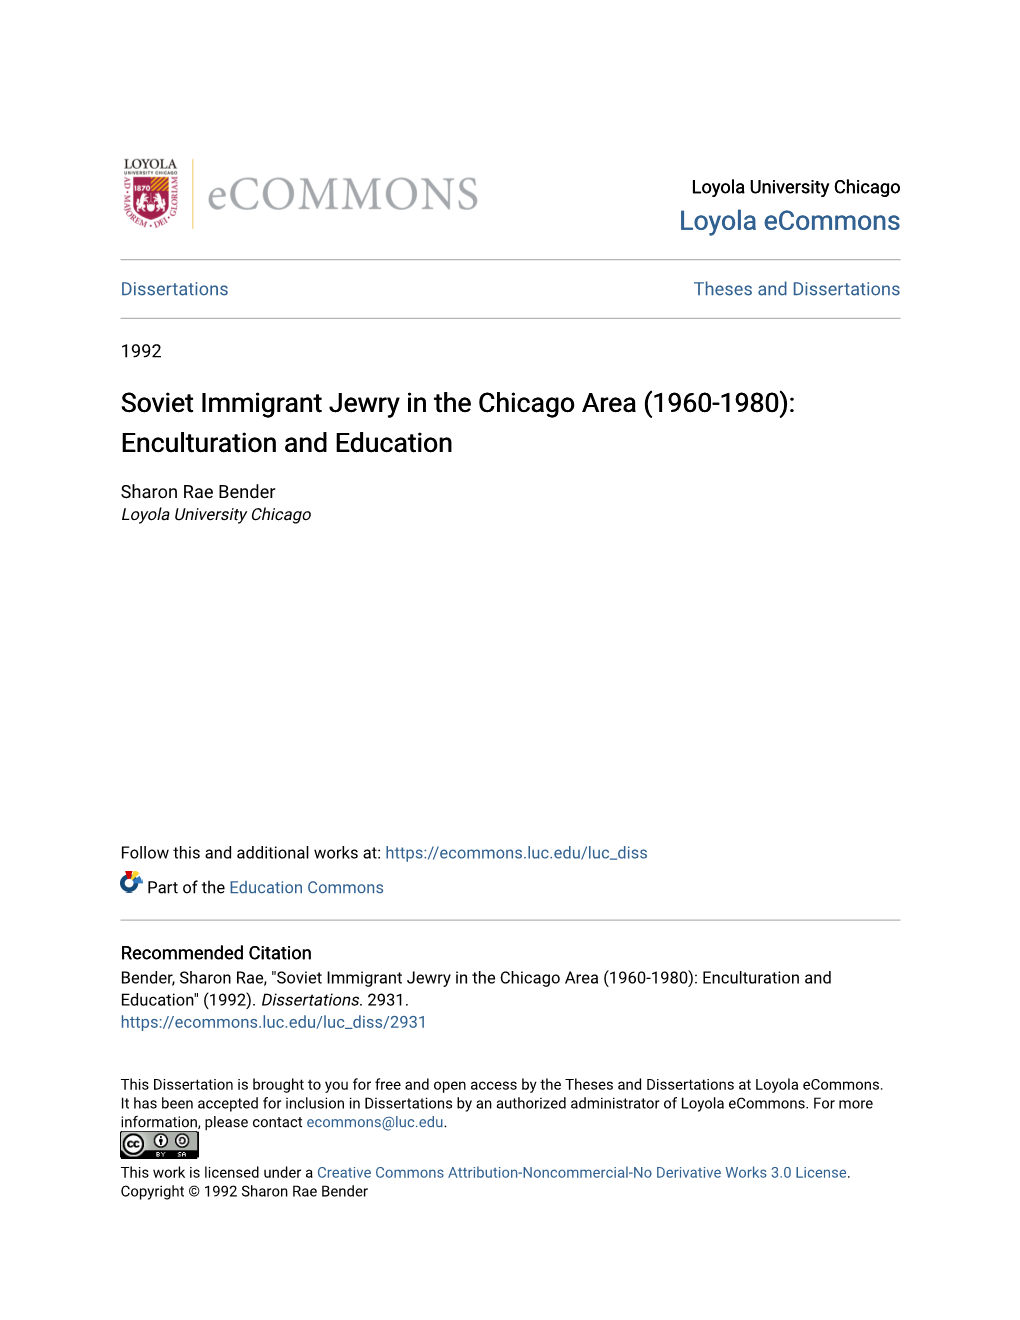 Soviet Immigrant Jewry in the Chicago Area (1960-1980): Enculturation and Education